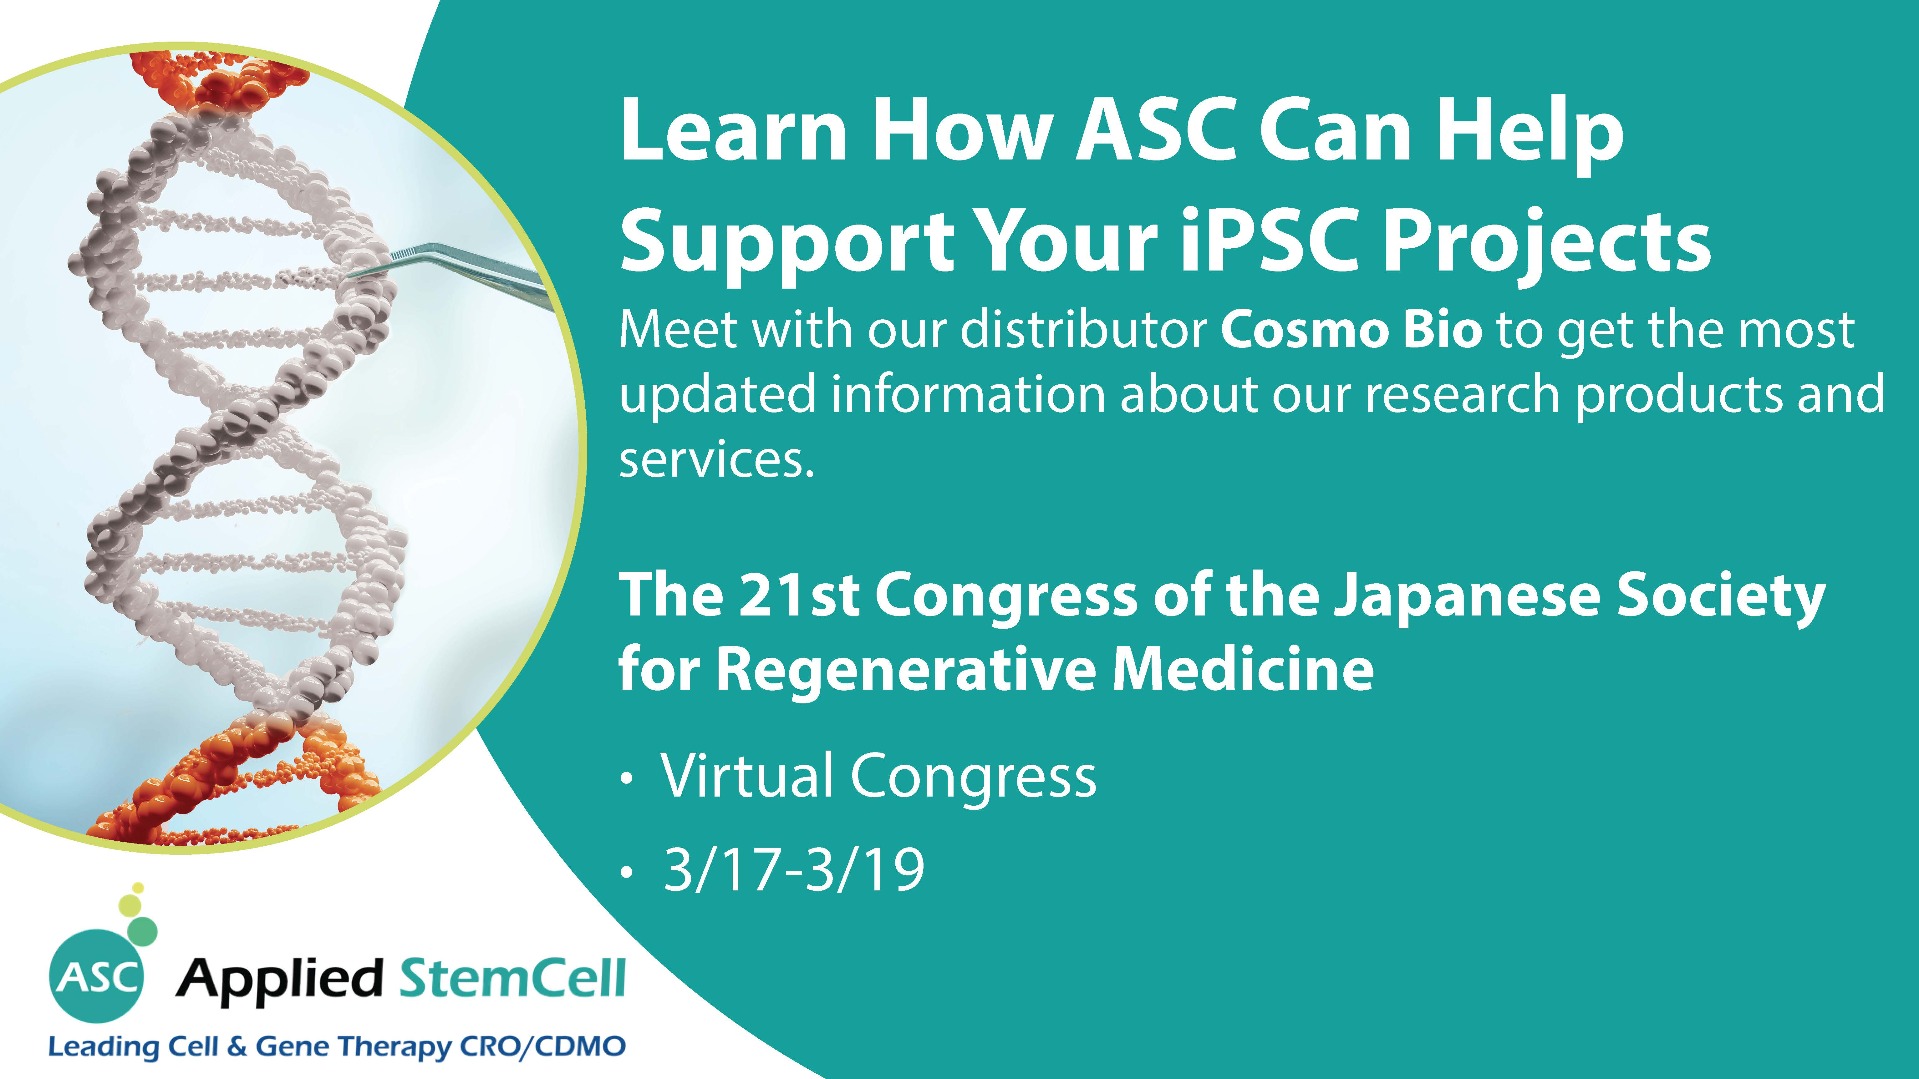 Meet with our distributor Cosmo Bio at The 21st Congress of the Japanese Society for Regenerative Medicine